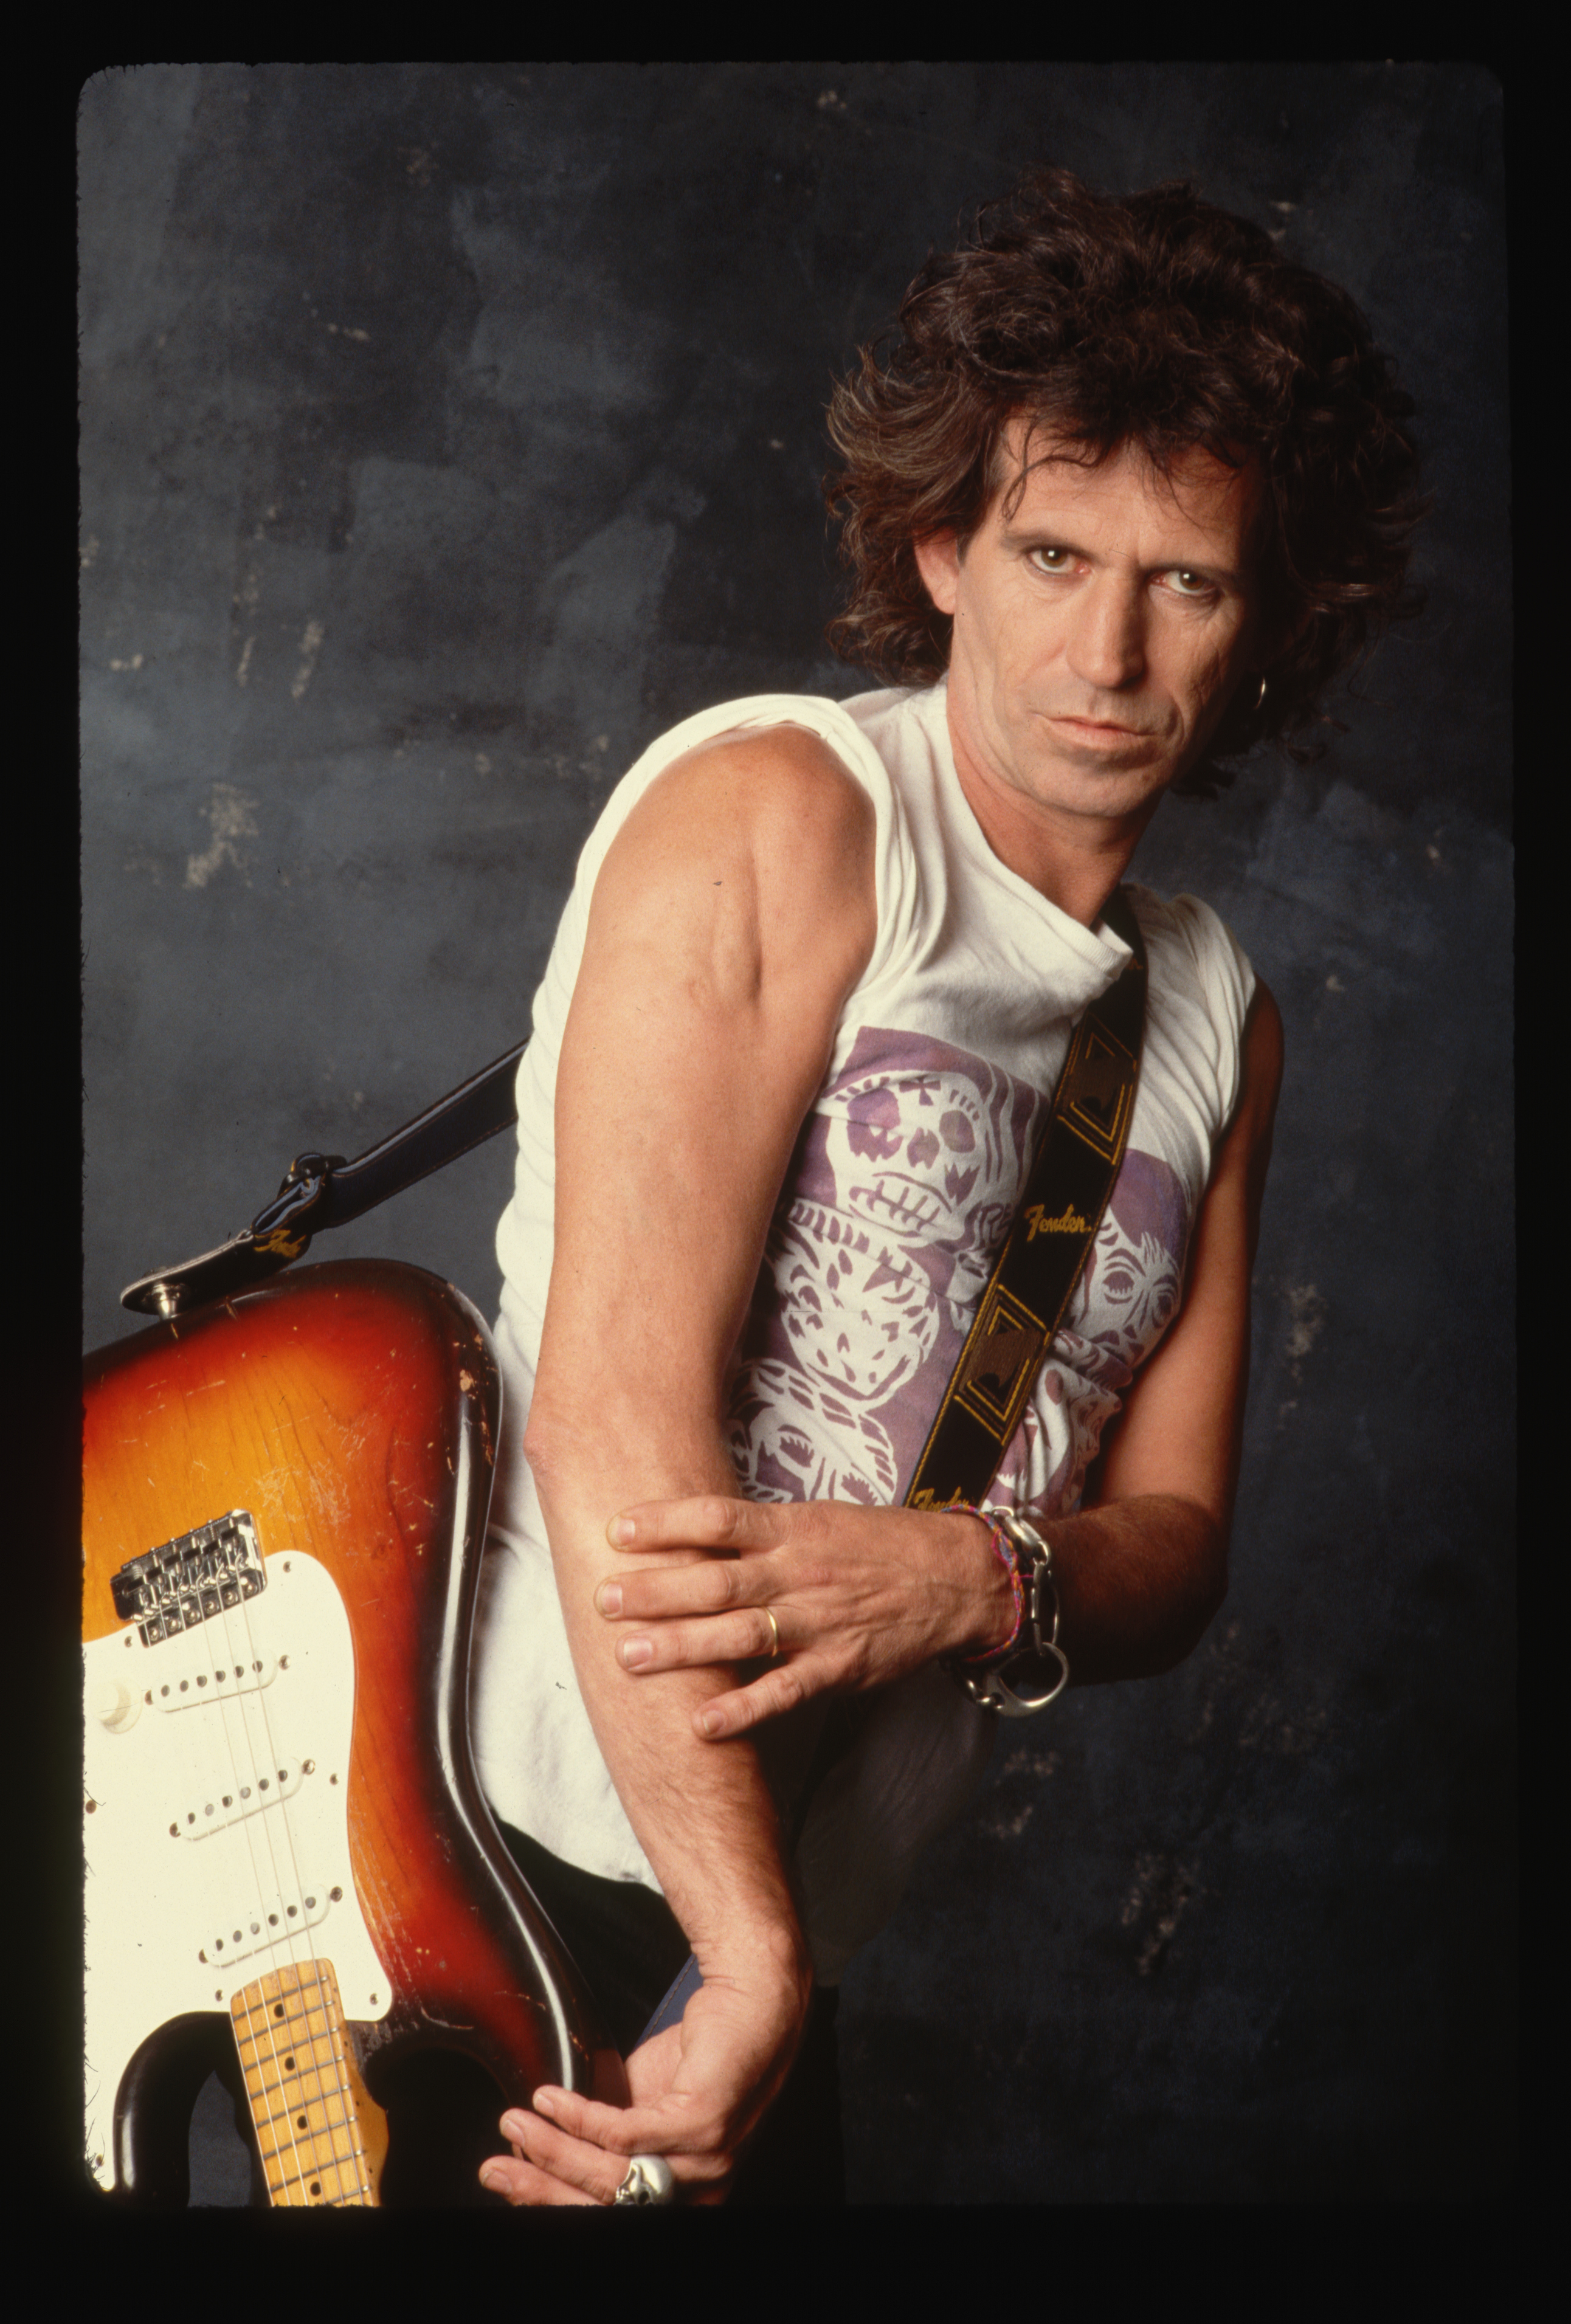 Keith Richards: Our 1985 Cover Story, <i>
<p><b>What changes have you seen the Stones go through personally?</b></p>
<p>I’ve seen ’em go through just about every damn thing. For ten years, or at least for five years, undoubtedly, I was the weak link in the chain. From my point of view, no way. But I was, in retrospect, in no condition to judge. That’s the horrible, terrible fascination of dope. That when you’re on it, everything’s cool. And the more you take it, the more cool it is, and the more necessary it is to be cool. It’s only in retrospect that you’re able to say, “Ah, this boy, you been led astray.”</p>
<p>When all is said and done, I’m either damn lucky or, as I like to kid myself, real smart that I didn’t manage to top myself in that period. After all, the only thing I was toppin’ the charts in then was One Most Likely to Kick the Bucket. And I held that position for several years. It’s one of my minor joys that I’m no longer on the last. <a href=